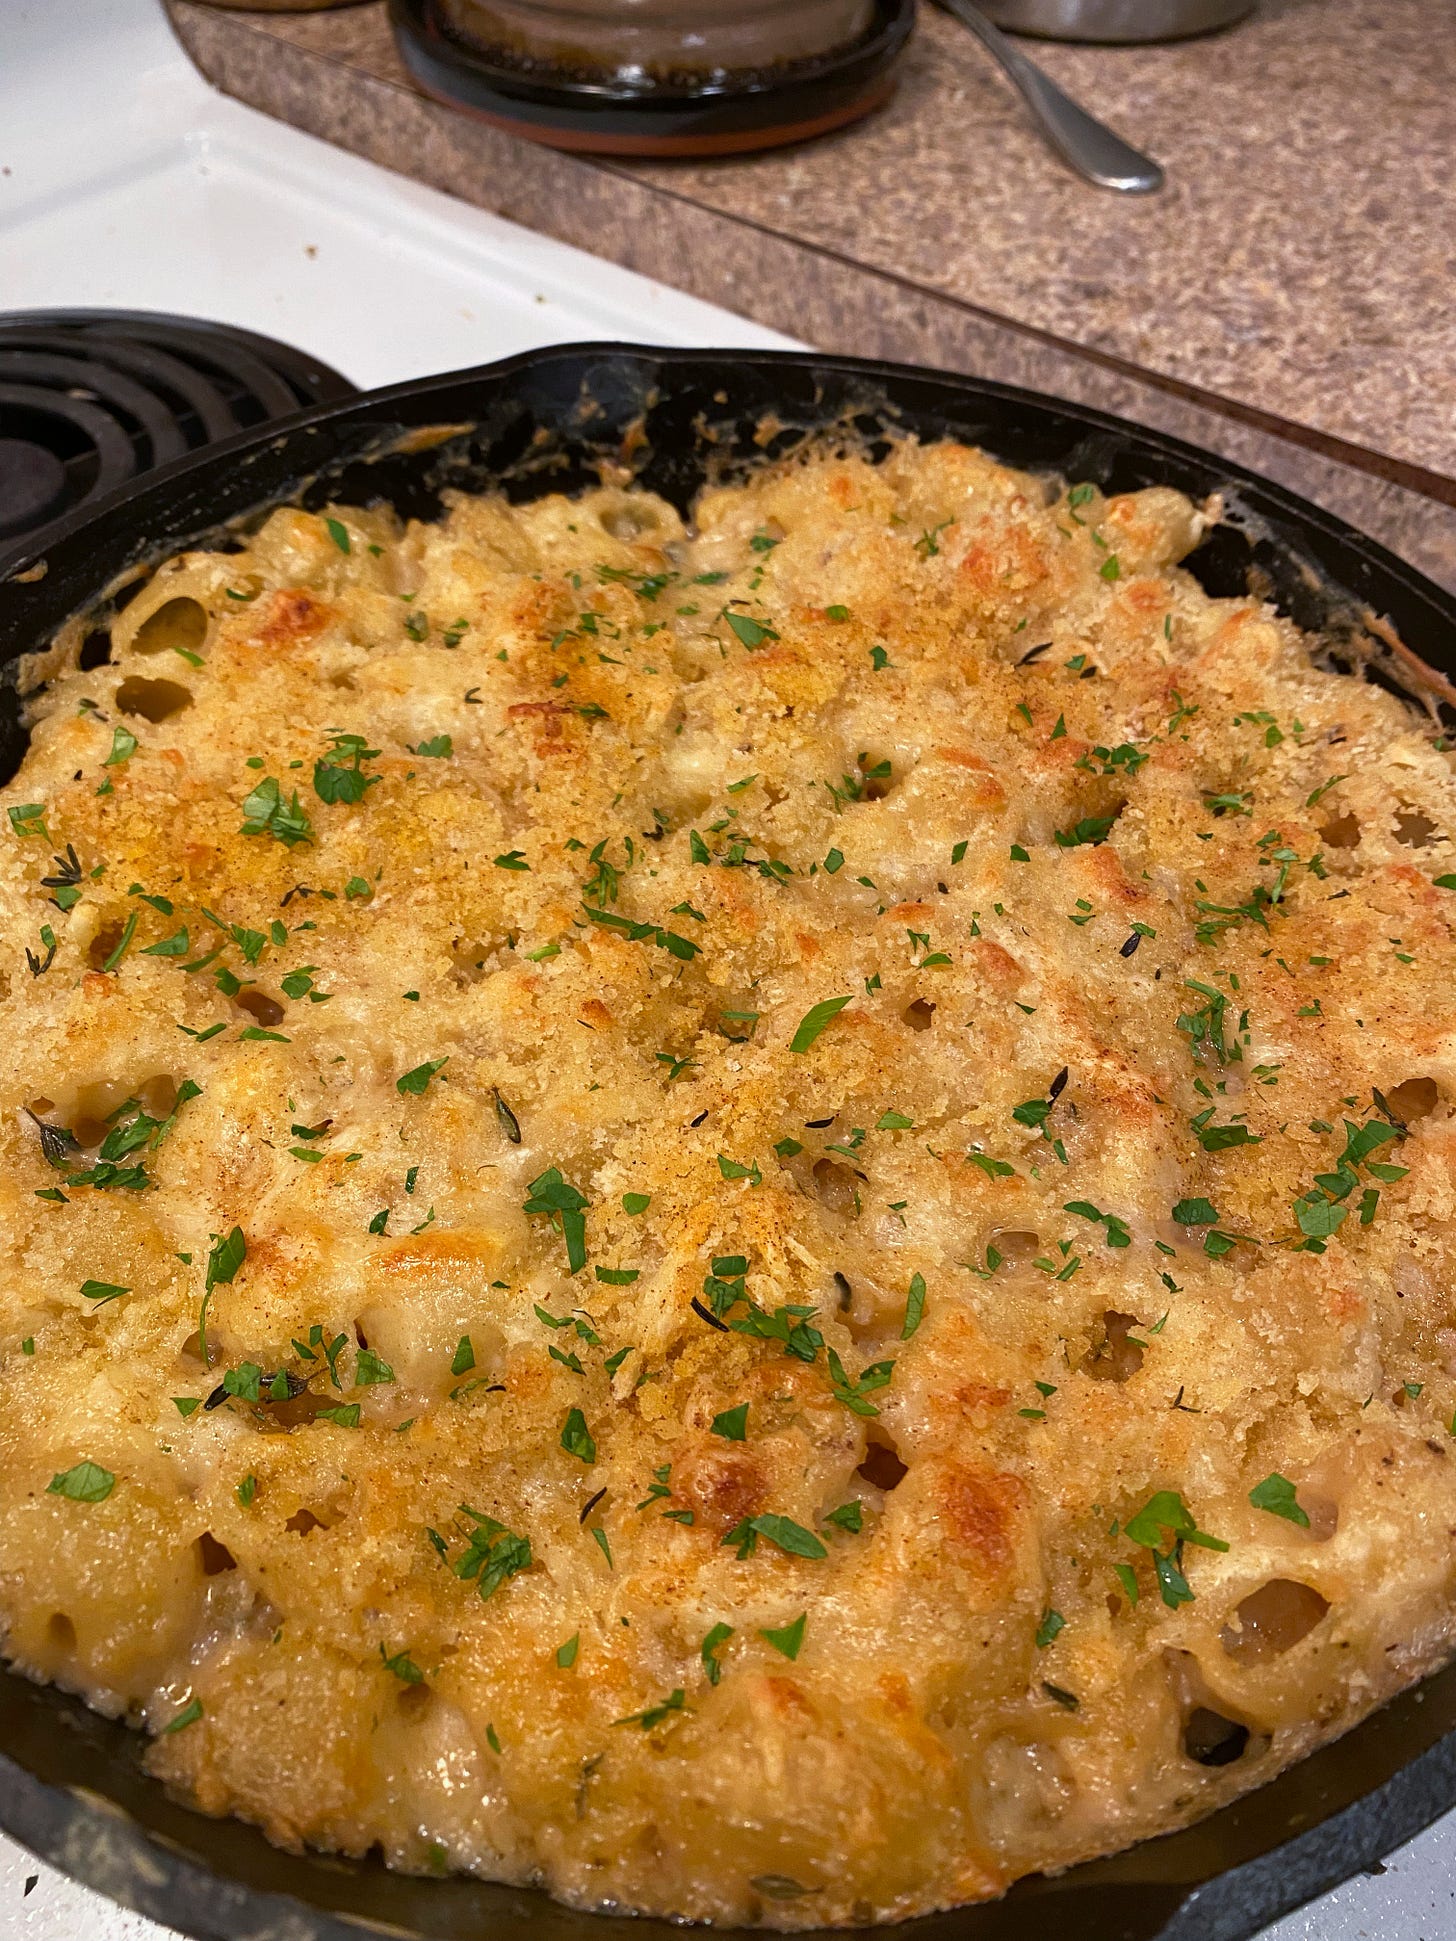 A cast-iron pan full of baked, browned mac & cheese with breadcrumbs, thyme, and parsley on top.